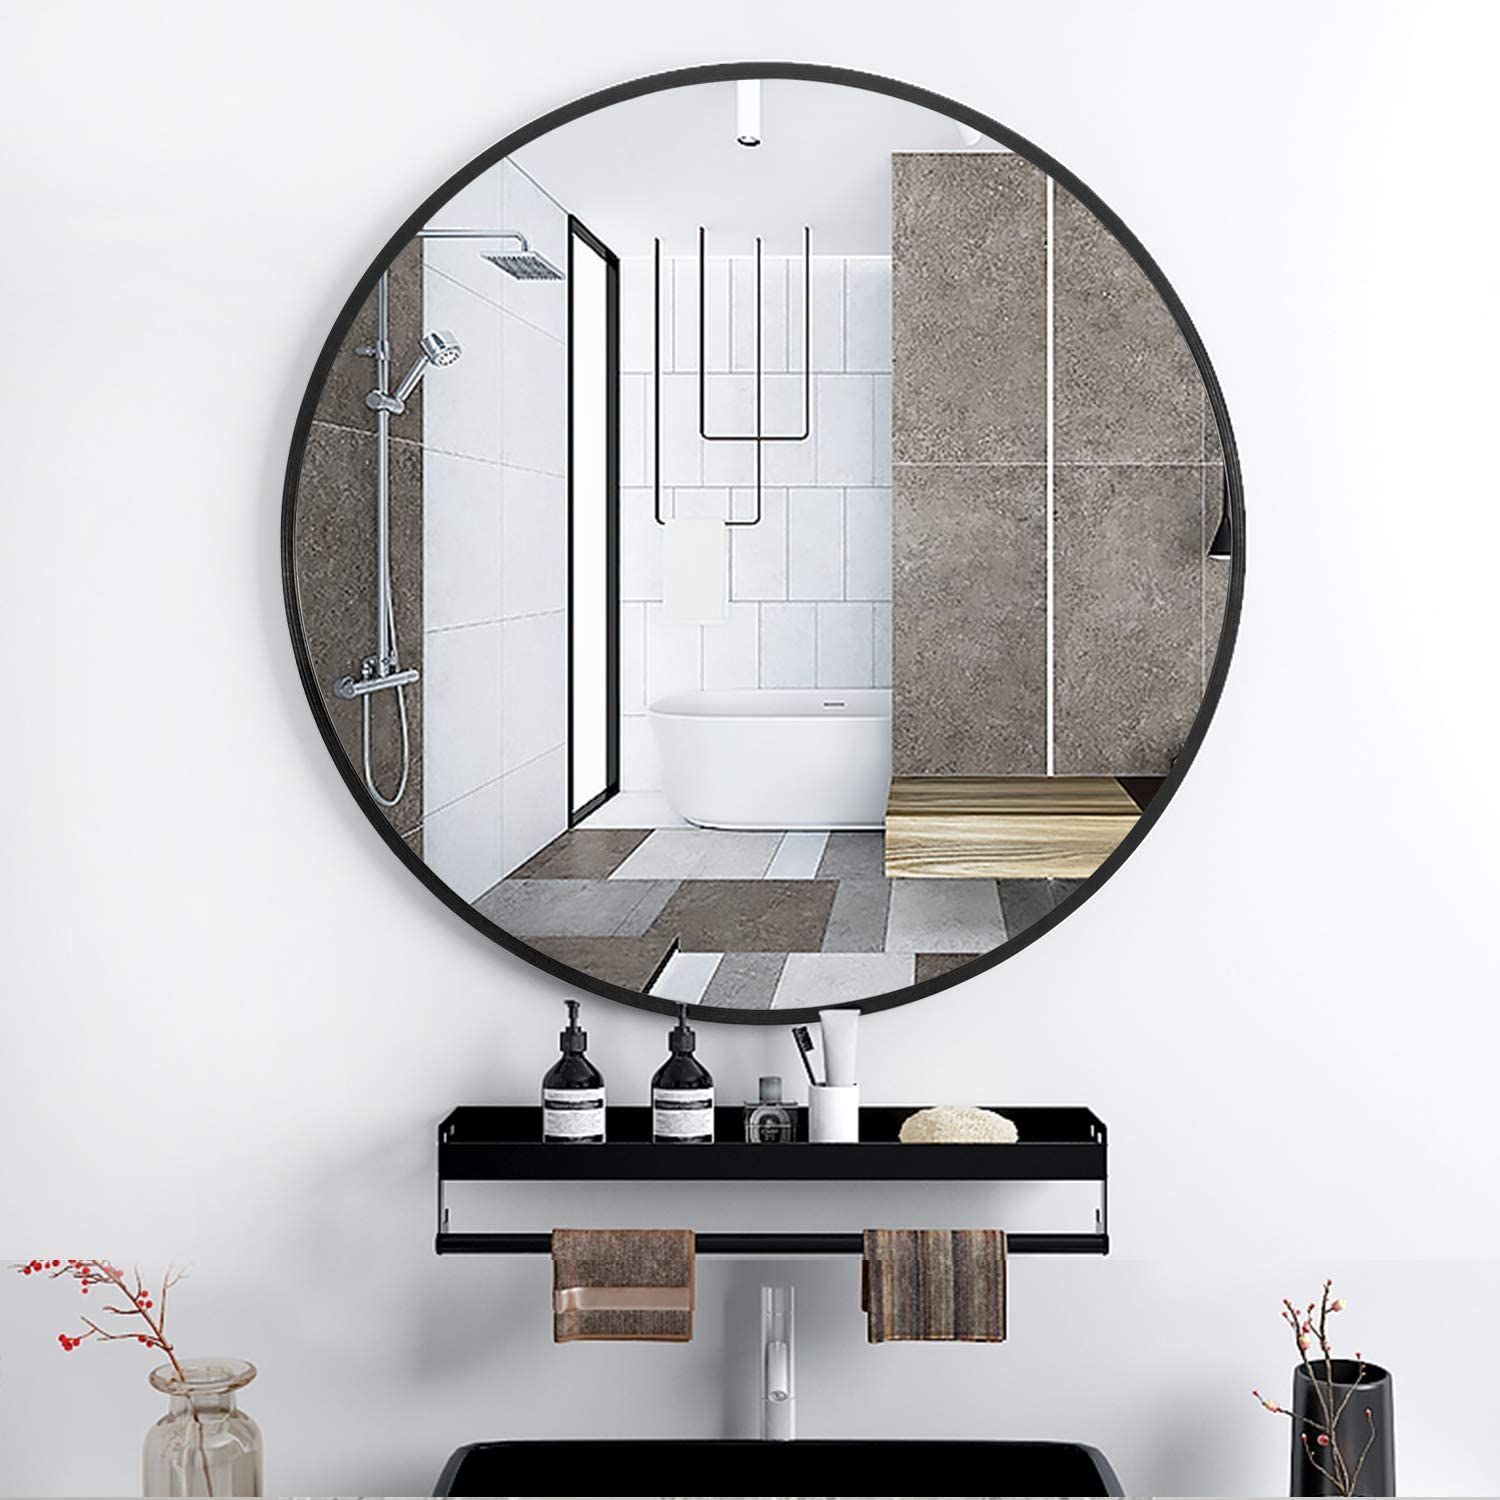 Neutype 16" Black Round Wall Mirror, Modern Aluminum Alloy Frame Accent In Decorative Round Wall Mirrors (View 7 of 15)